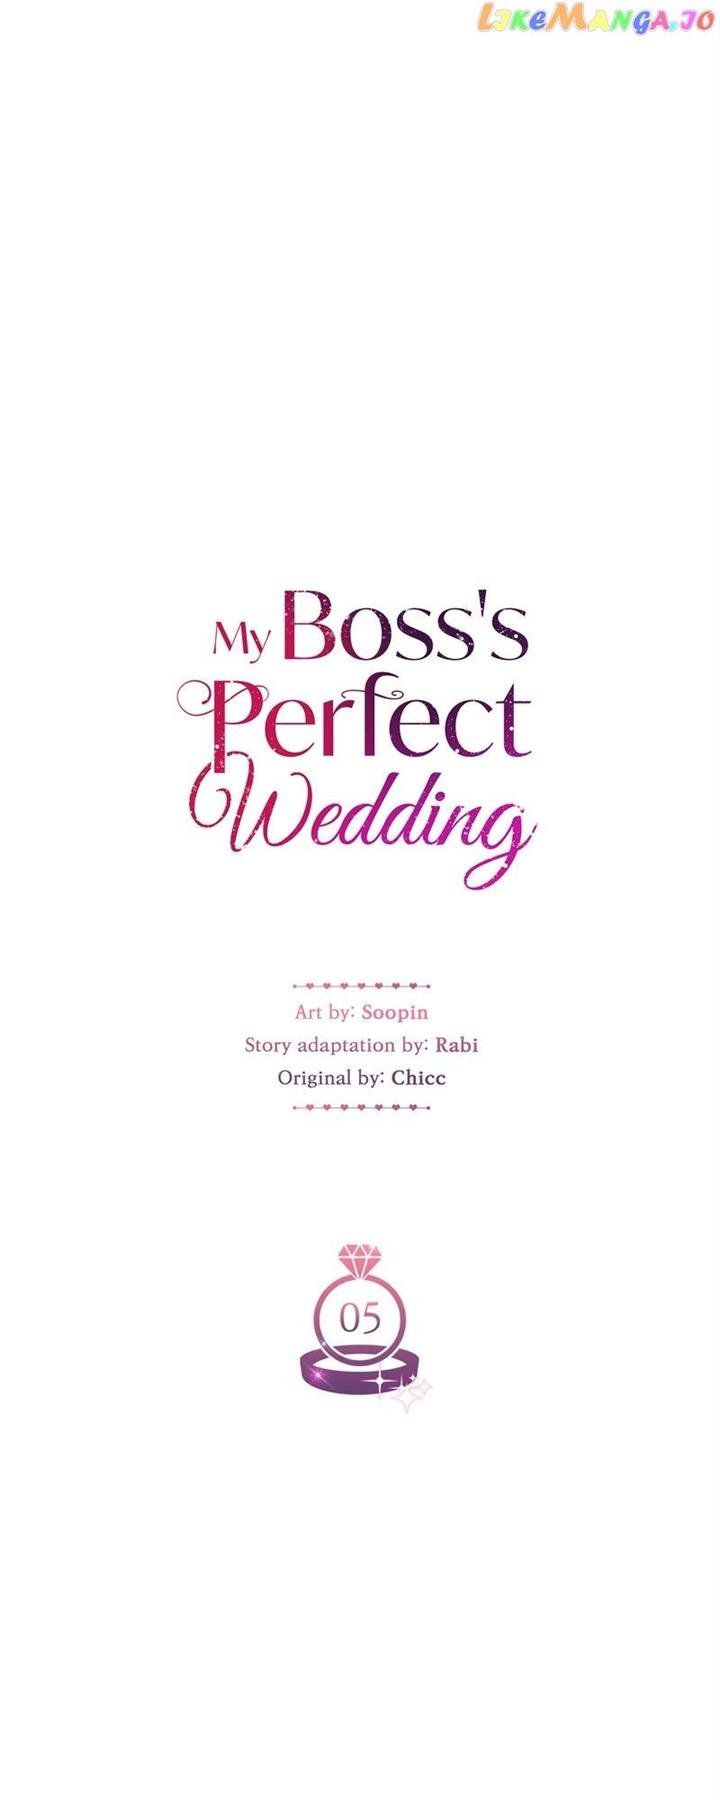 My Bosss’s Perfect Wedding chapter 5